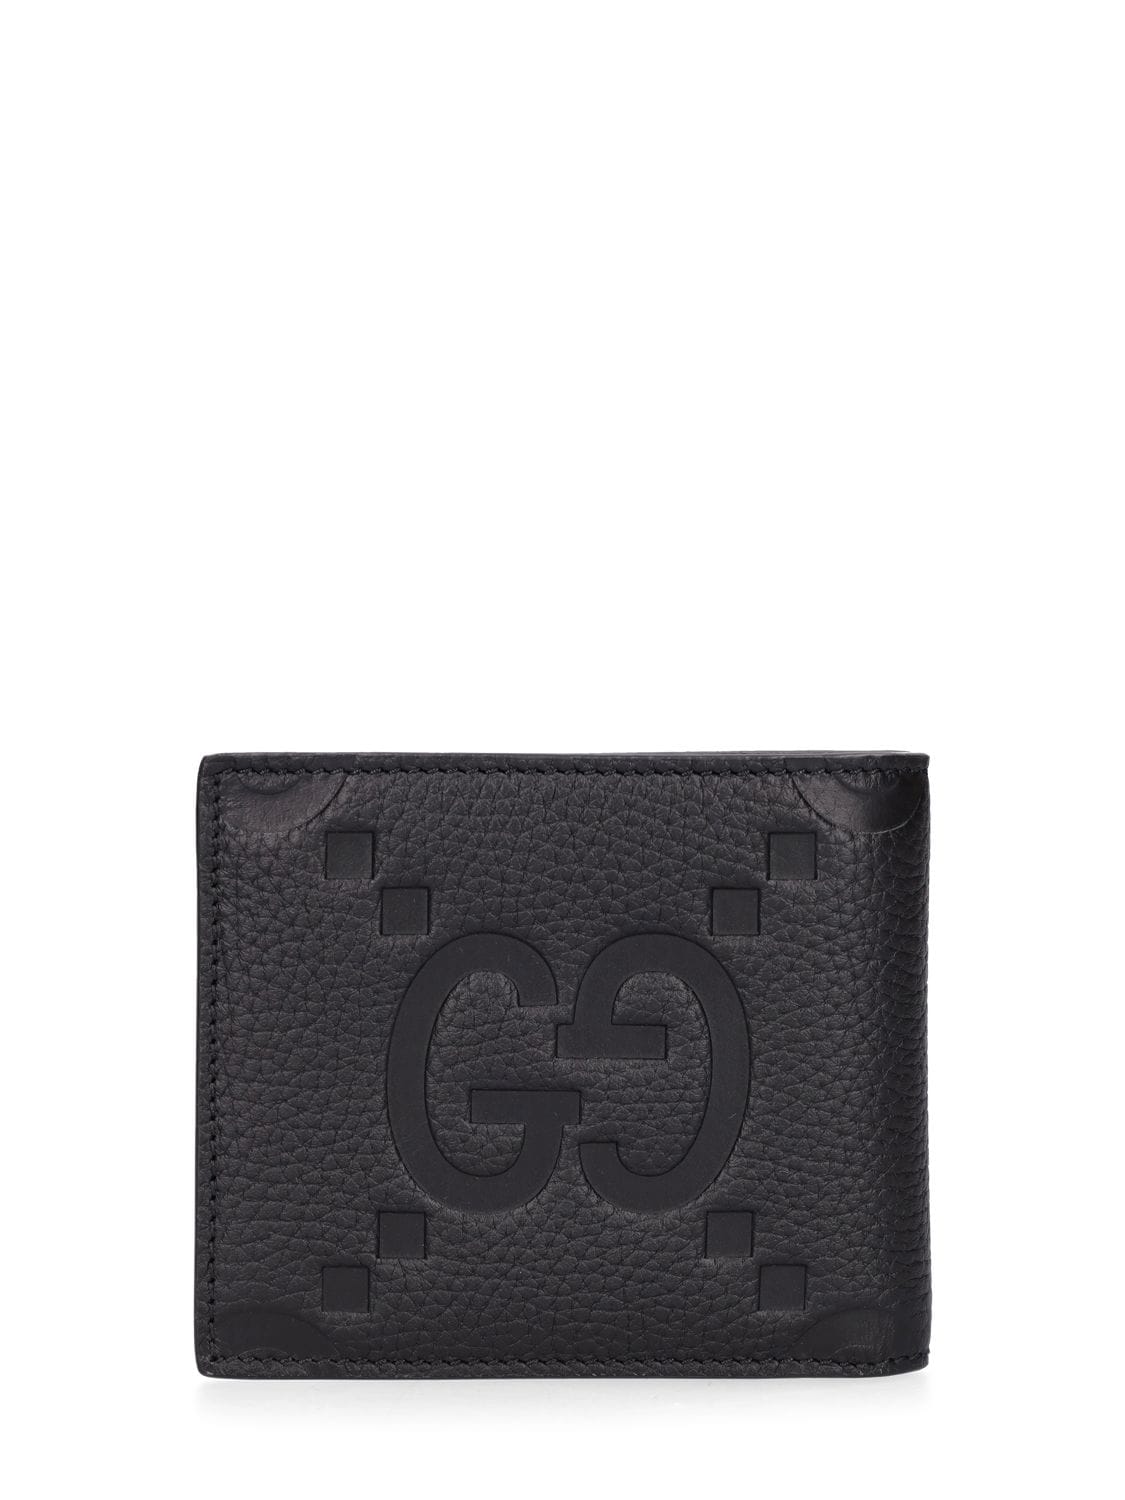 Gucci Men's Jumbo GG Leather Wallet